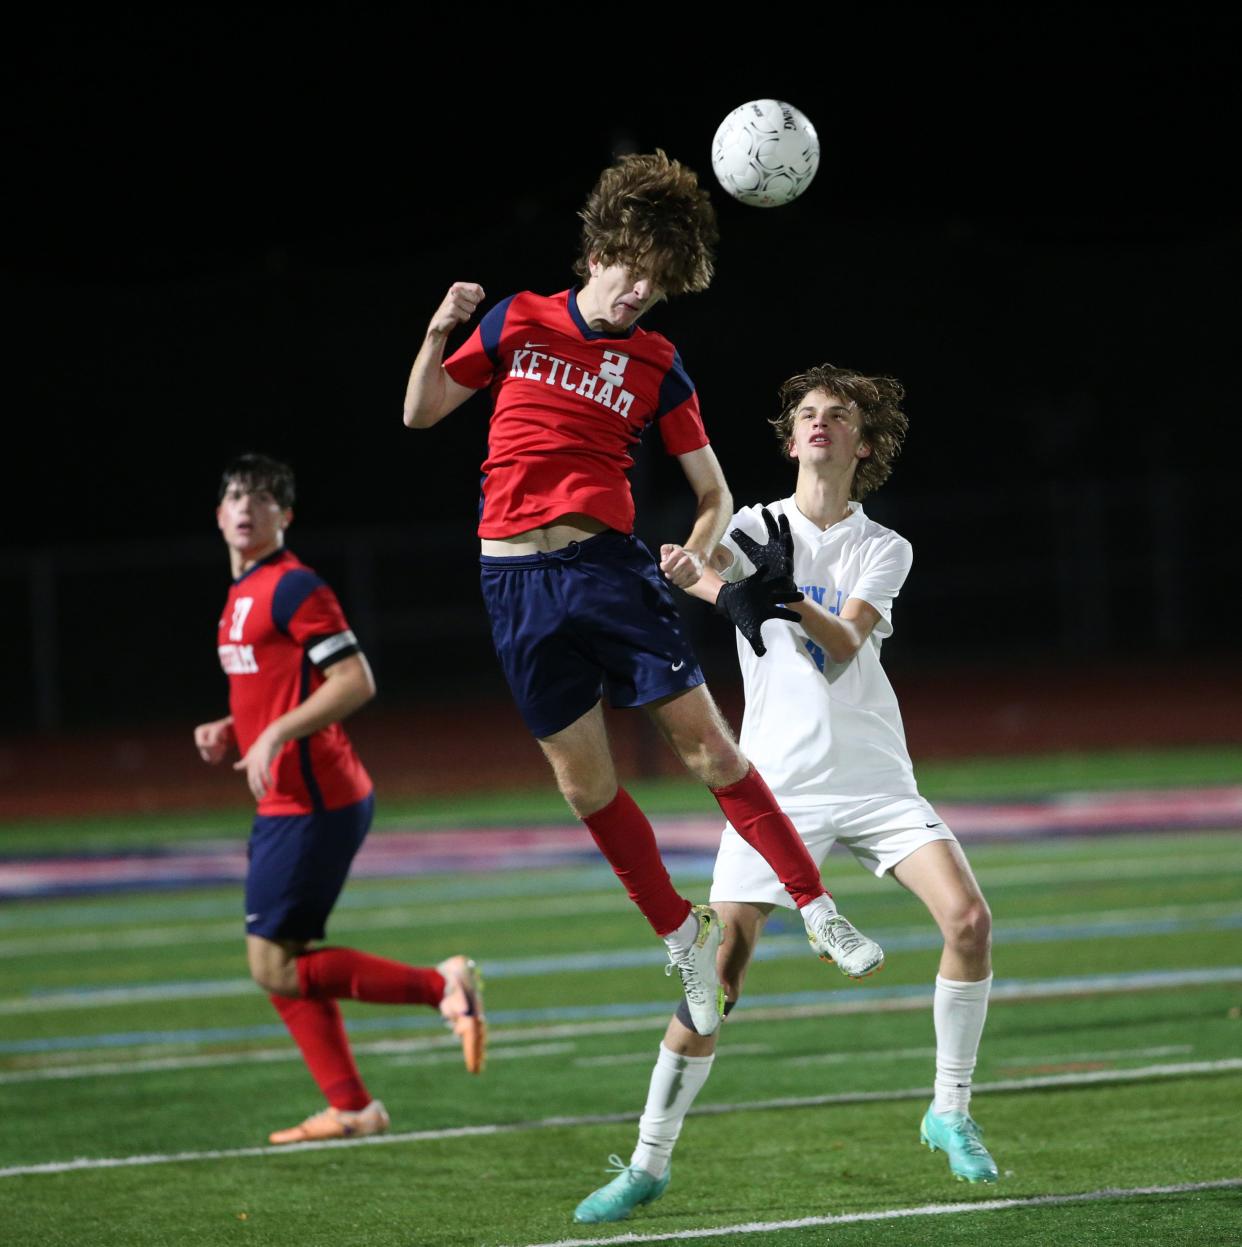 Ketcham's Travis Delaney headers the ball away from John Jay's Gabriel Koscik during a Section 1 quarterfinal on October 23, 2023.